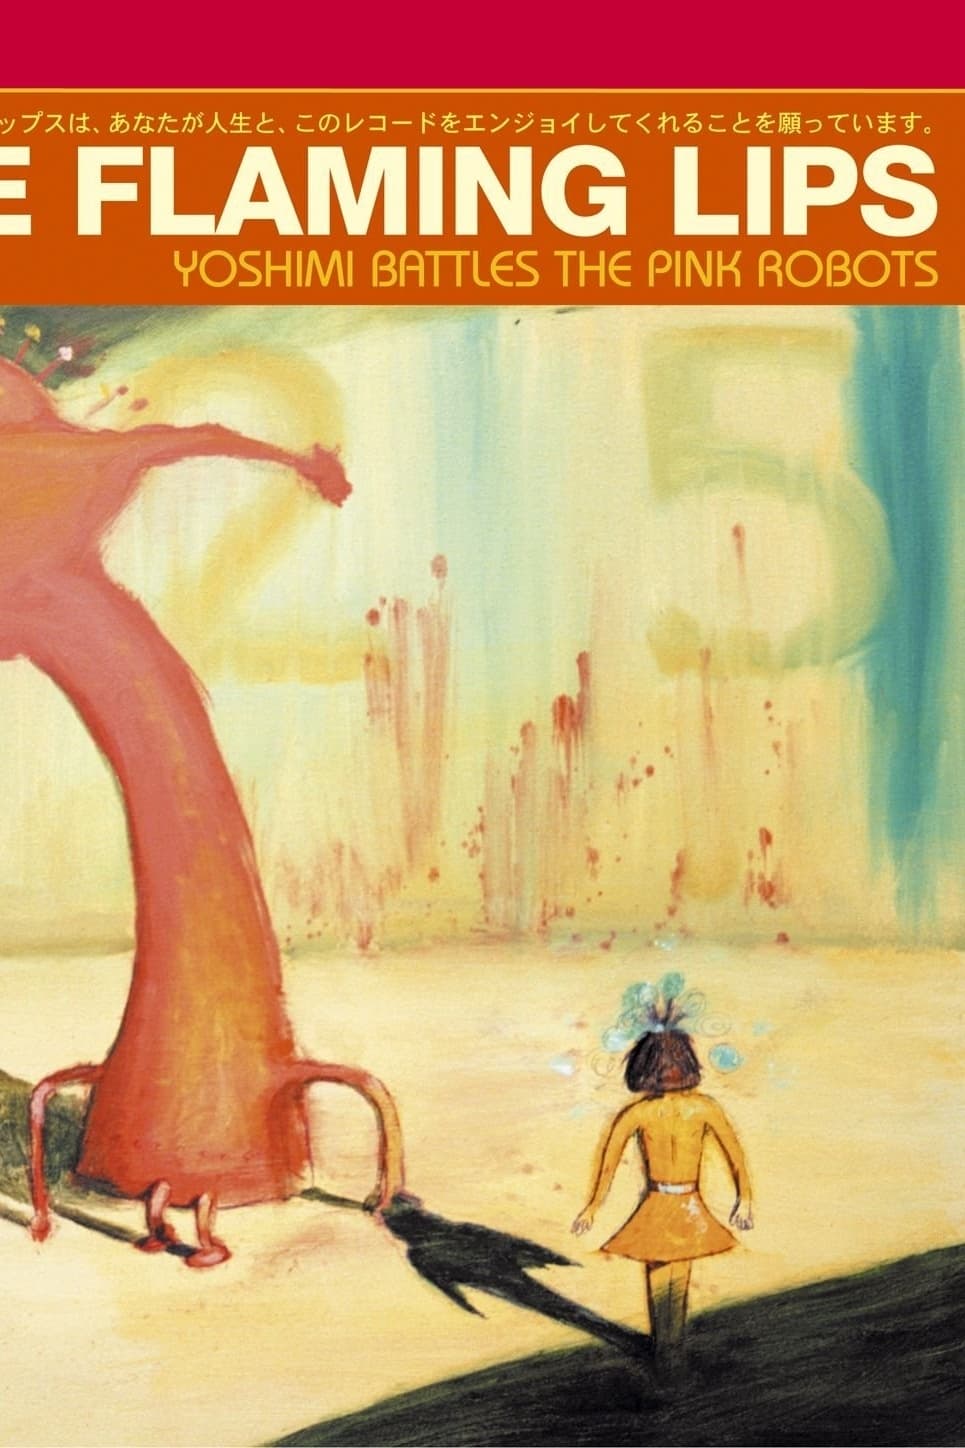 The Flaming Lips: Yoshimi Battles The Pink Robots 5.1